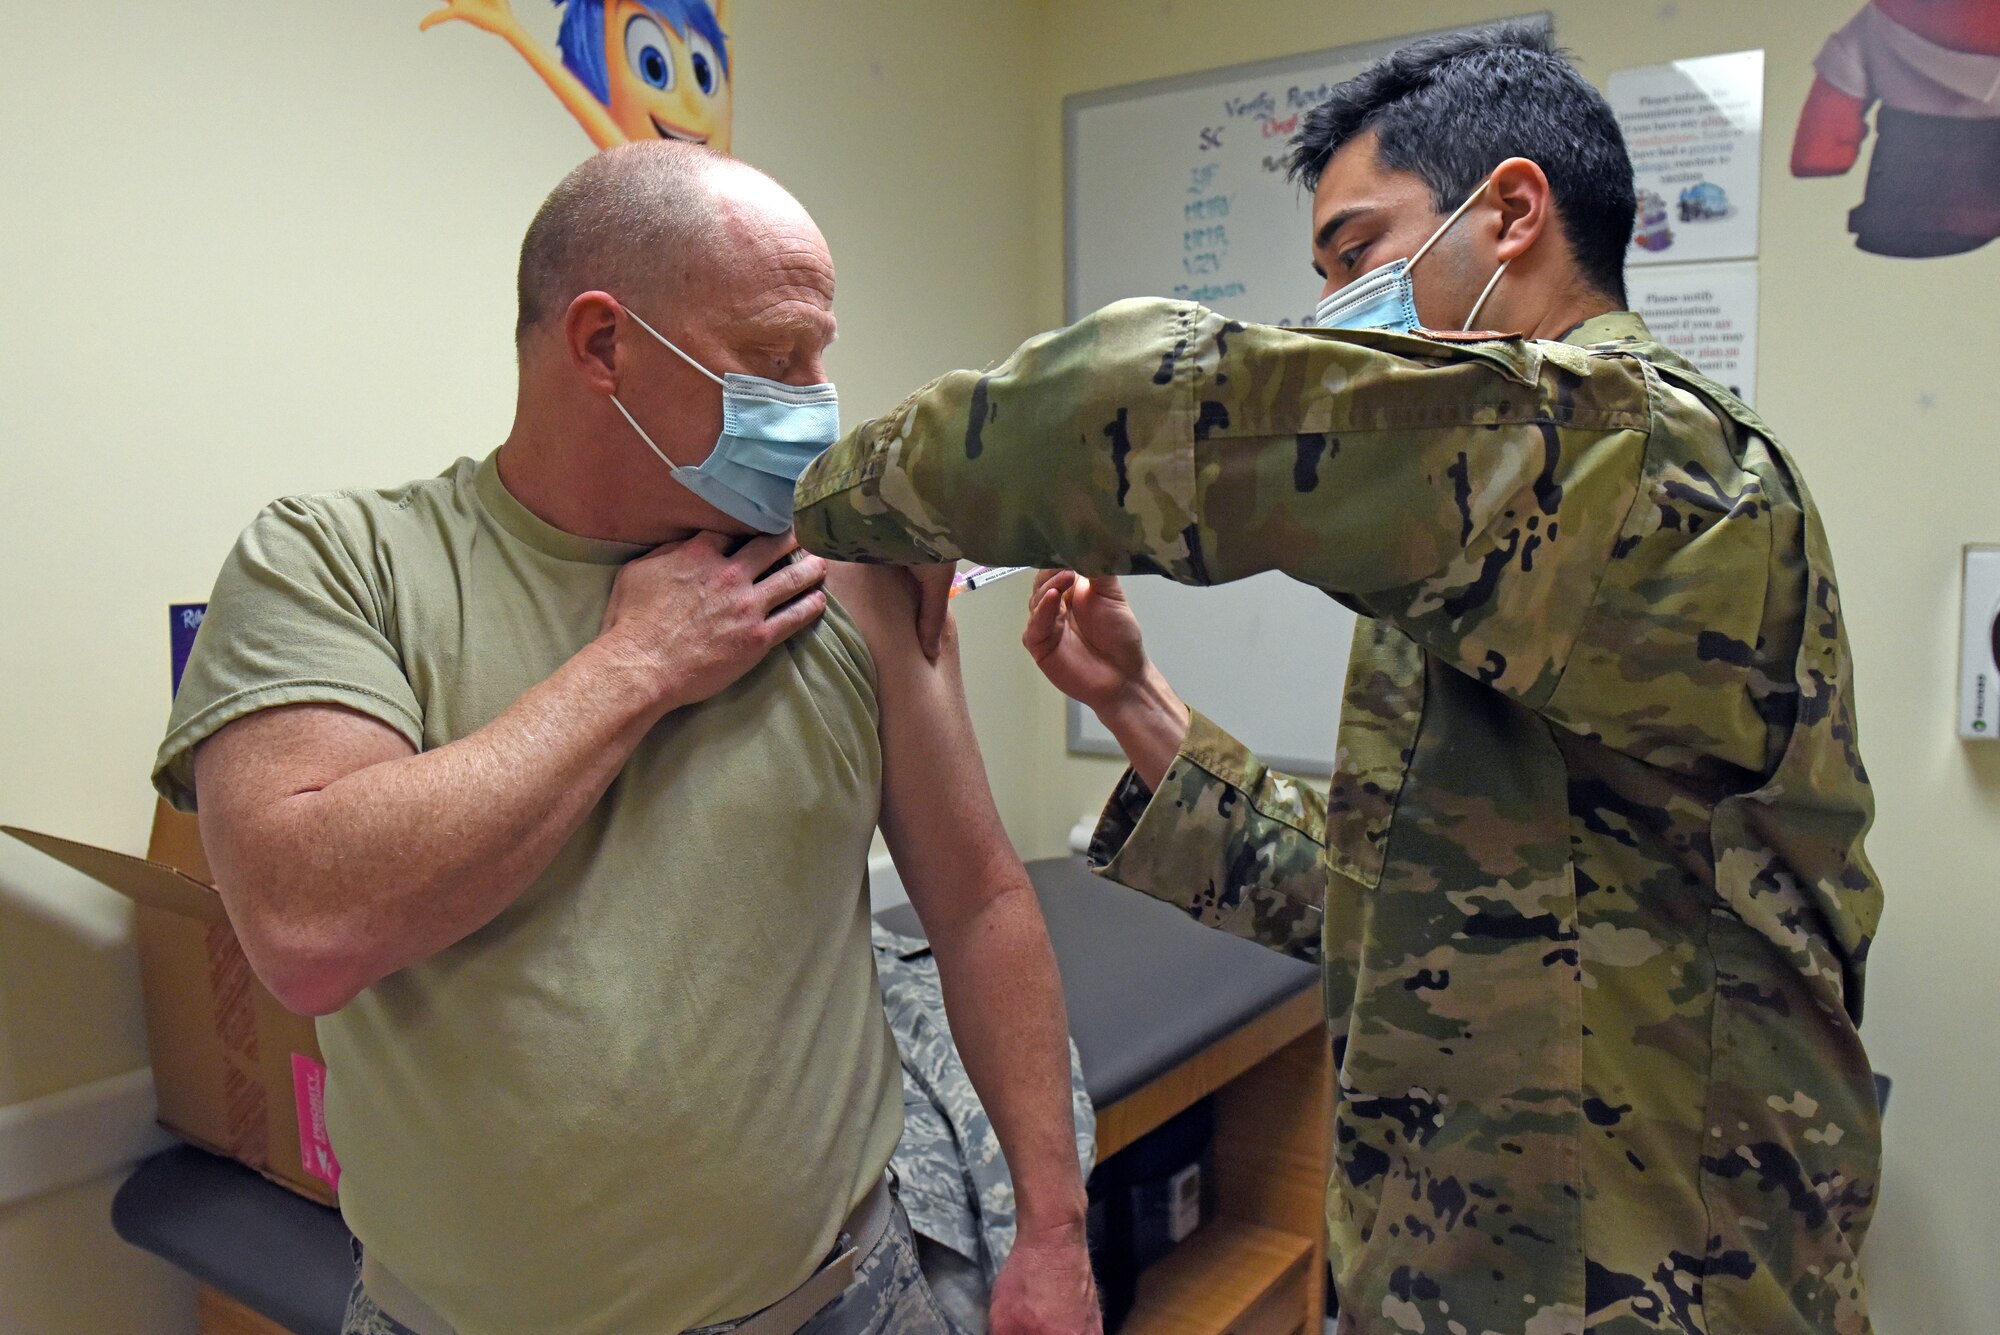 Staff Sgt. Daniel Contreras, a medical technician in the 419th Medical Squadron, administers a COVID-19 vaccine to Lt. Col. Brent Milne, a dentist in the MDS, Jan. 9, 2021, at Hill Air Force Base, Utah. Milne is one of the first reservists in the 419th Fighter Wing to receive the COVID-19 vaccine.